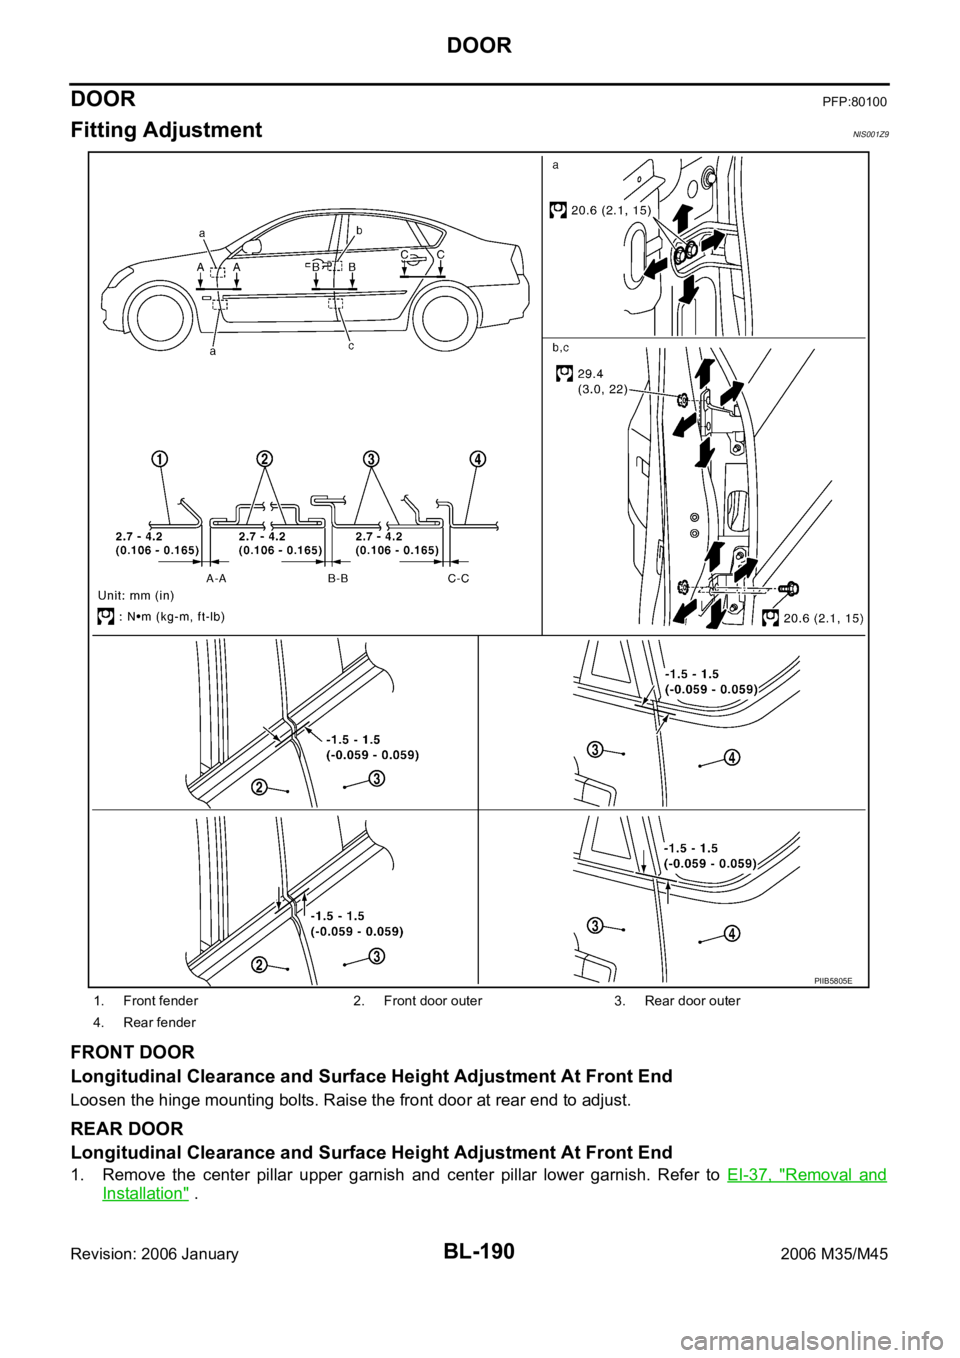 INFINITI M35 2006  Factory Service Manual BL-190
DOOR
Revision: 2006 January2006 M35/M45
DOORPFP:80100
Fitting AdjustmentNIS001Z9
FRONT DOOR
Longitudinal Clearance and Surface Height Adjustment At Front End
Loosen the hinge mounting bolts. Ra